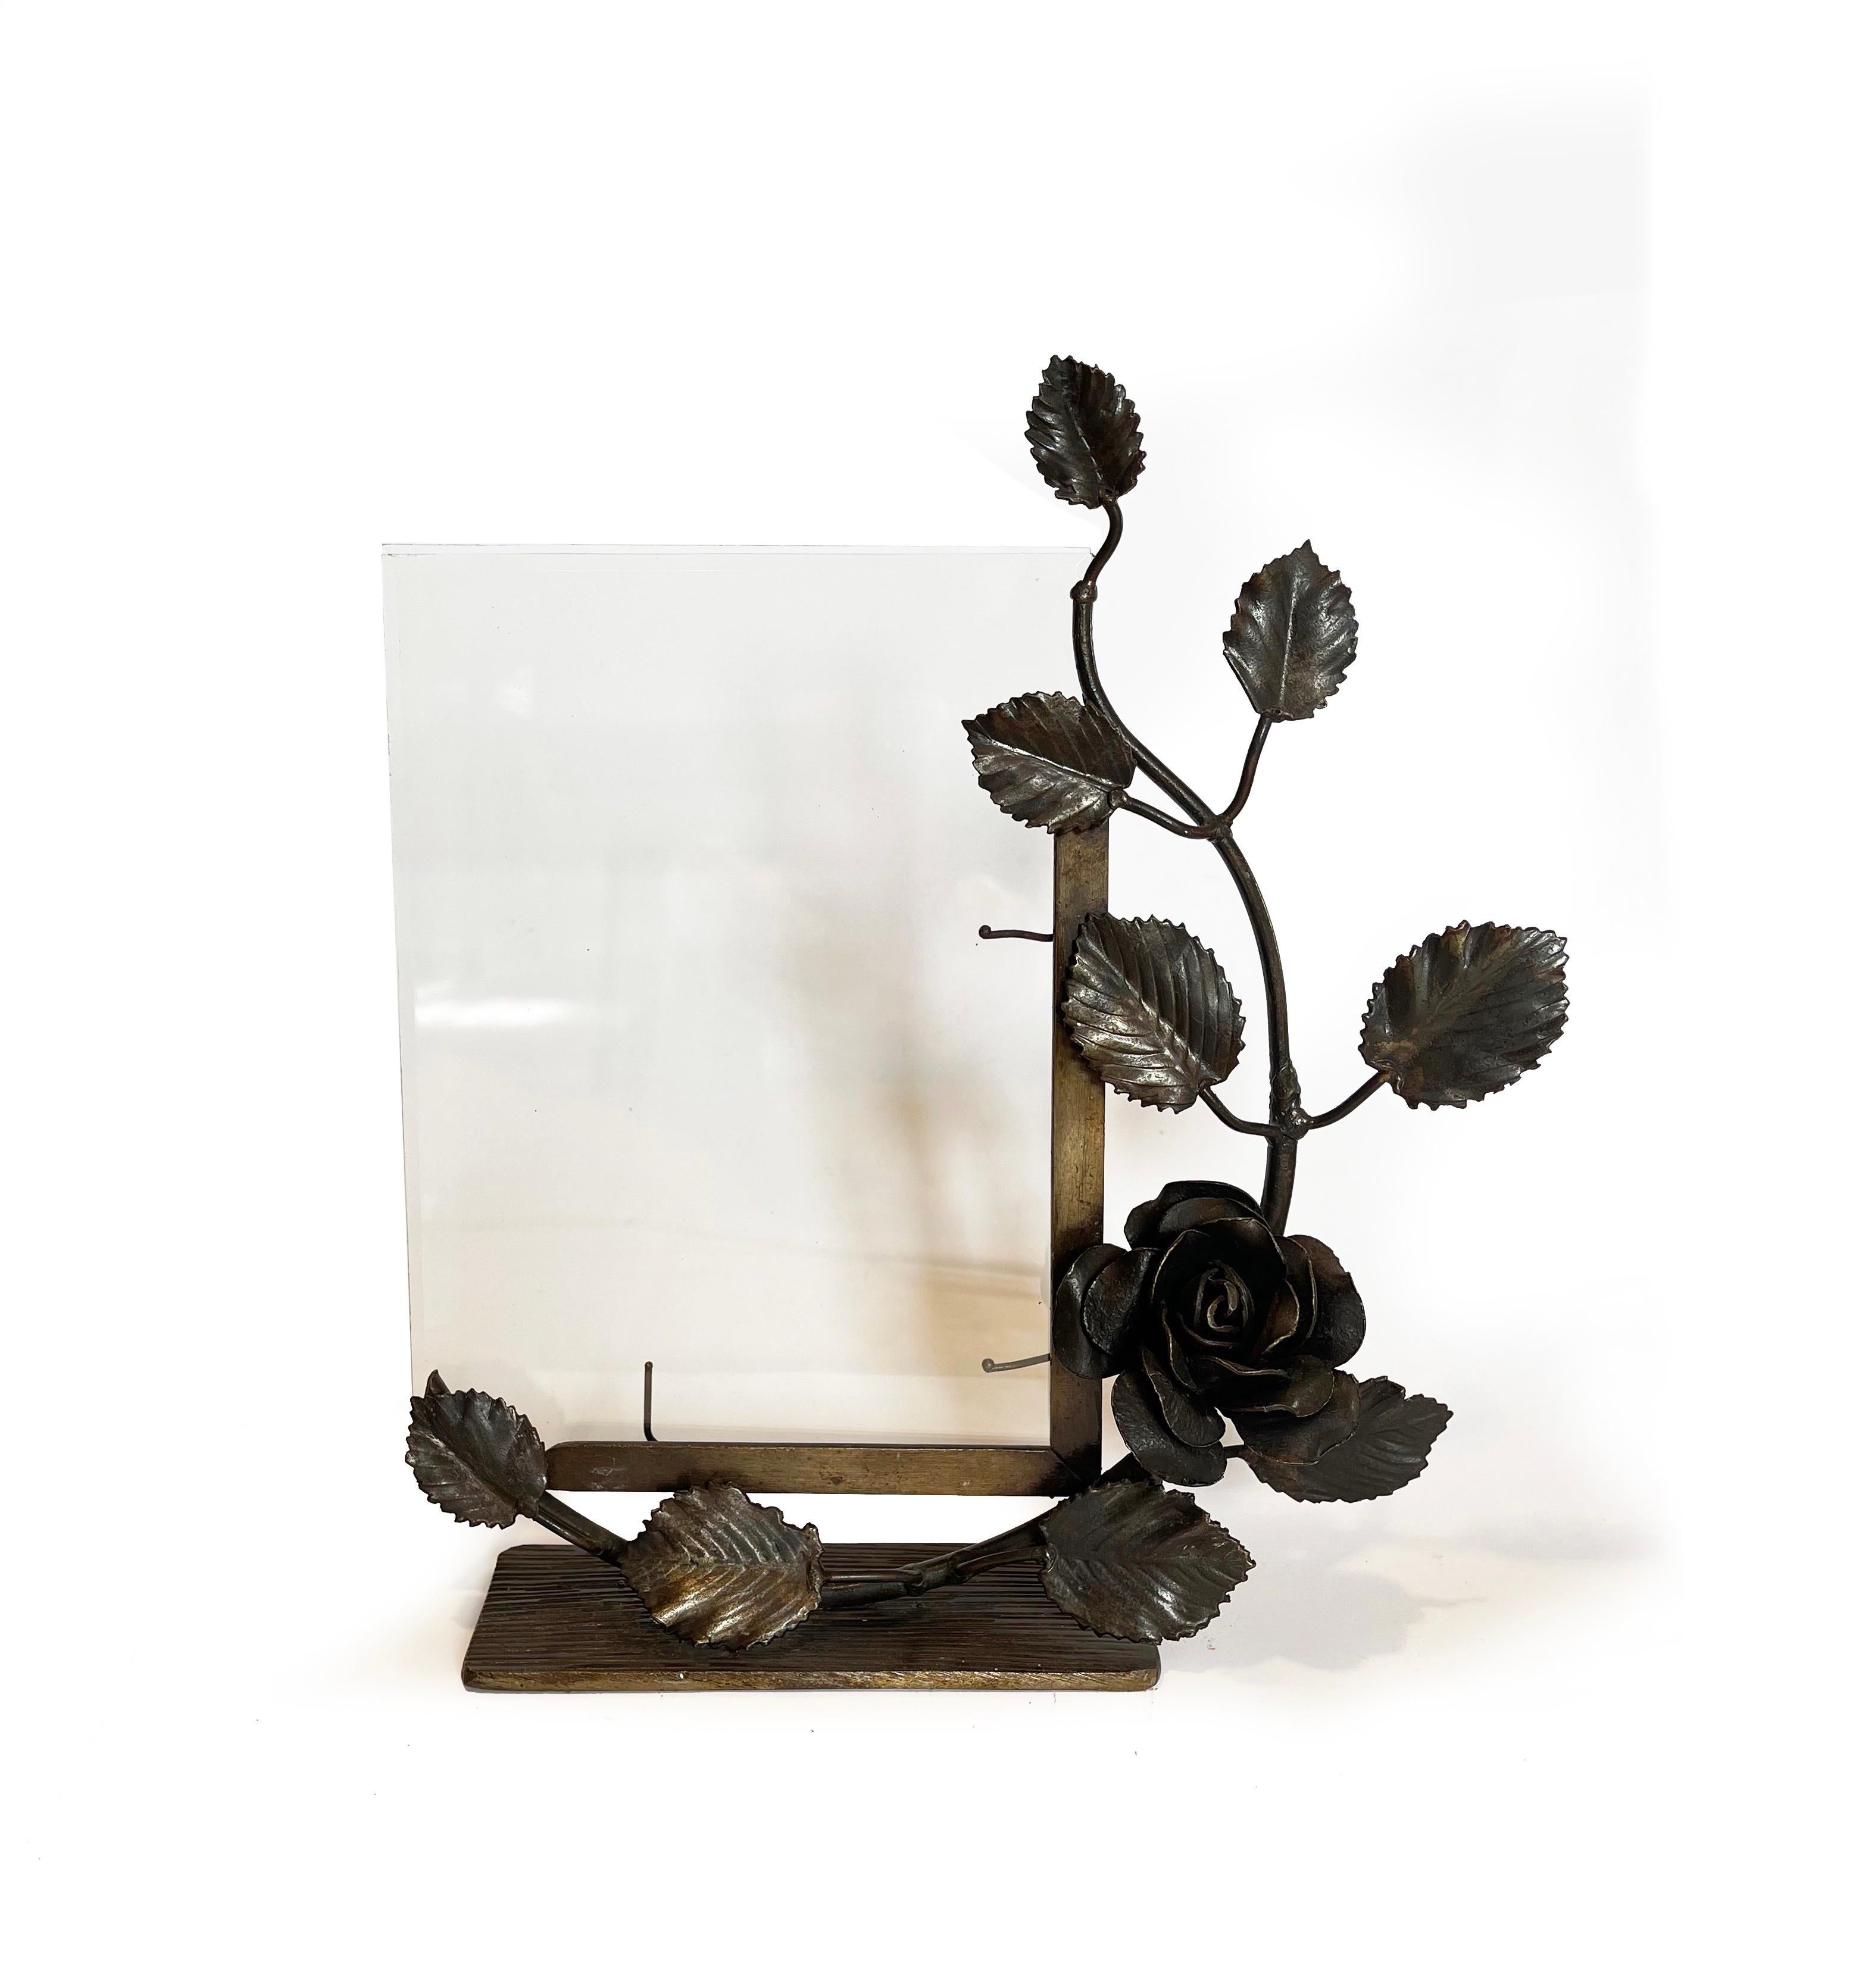 Beautifully forged picture frame of the art deco period.
Delicately shaped rose vine arranged around the rectangle picture frame, which holds the beveled glass.
The glass is held by tentacle-like arms, and measures 9'' (233 mm) x 6.7'' (171 mm)